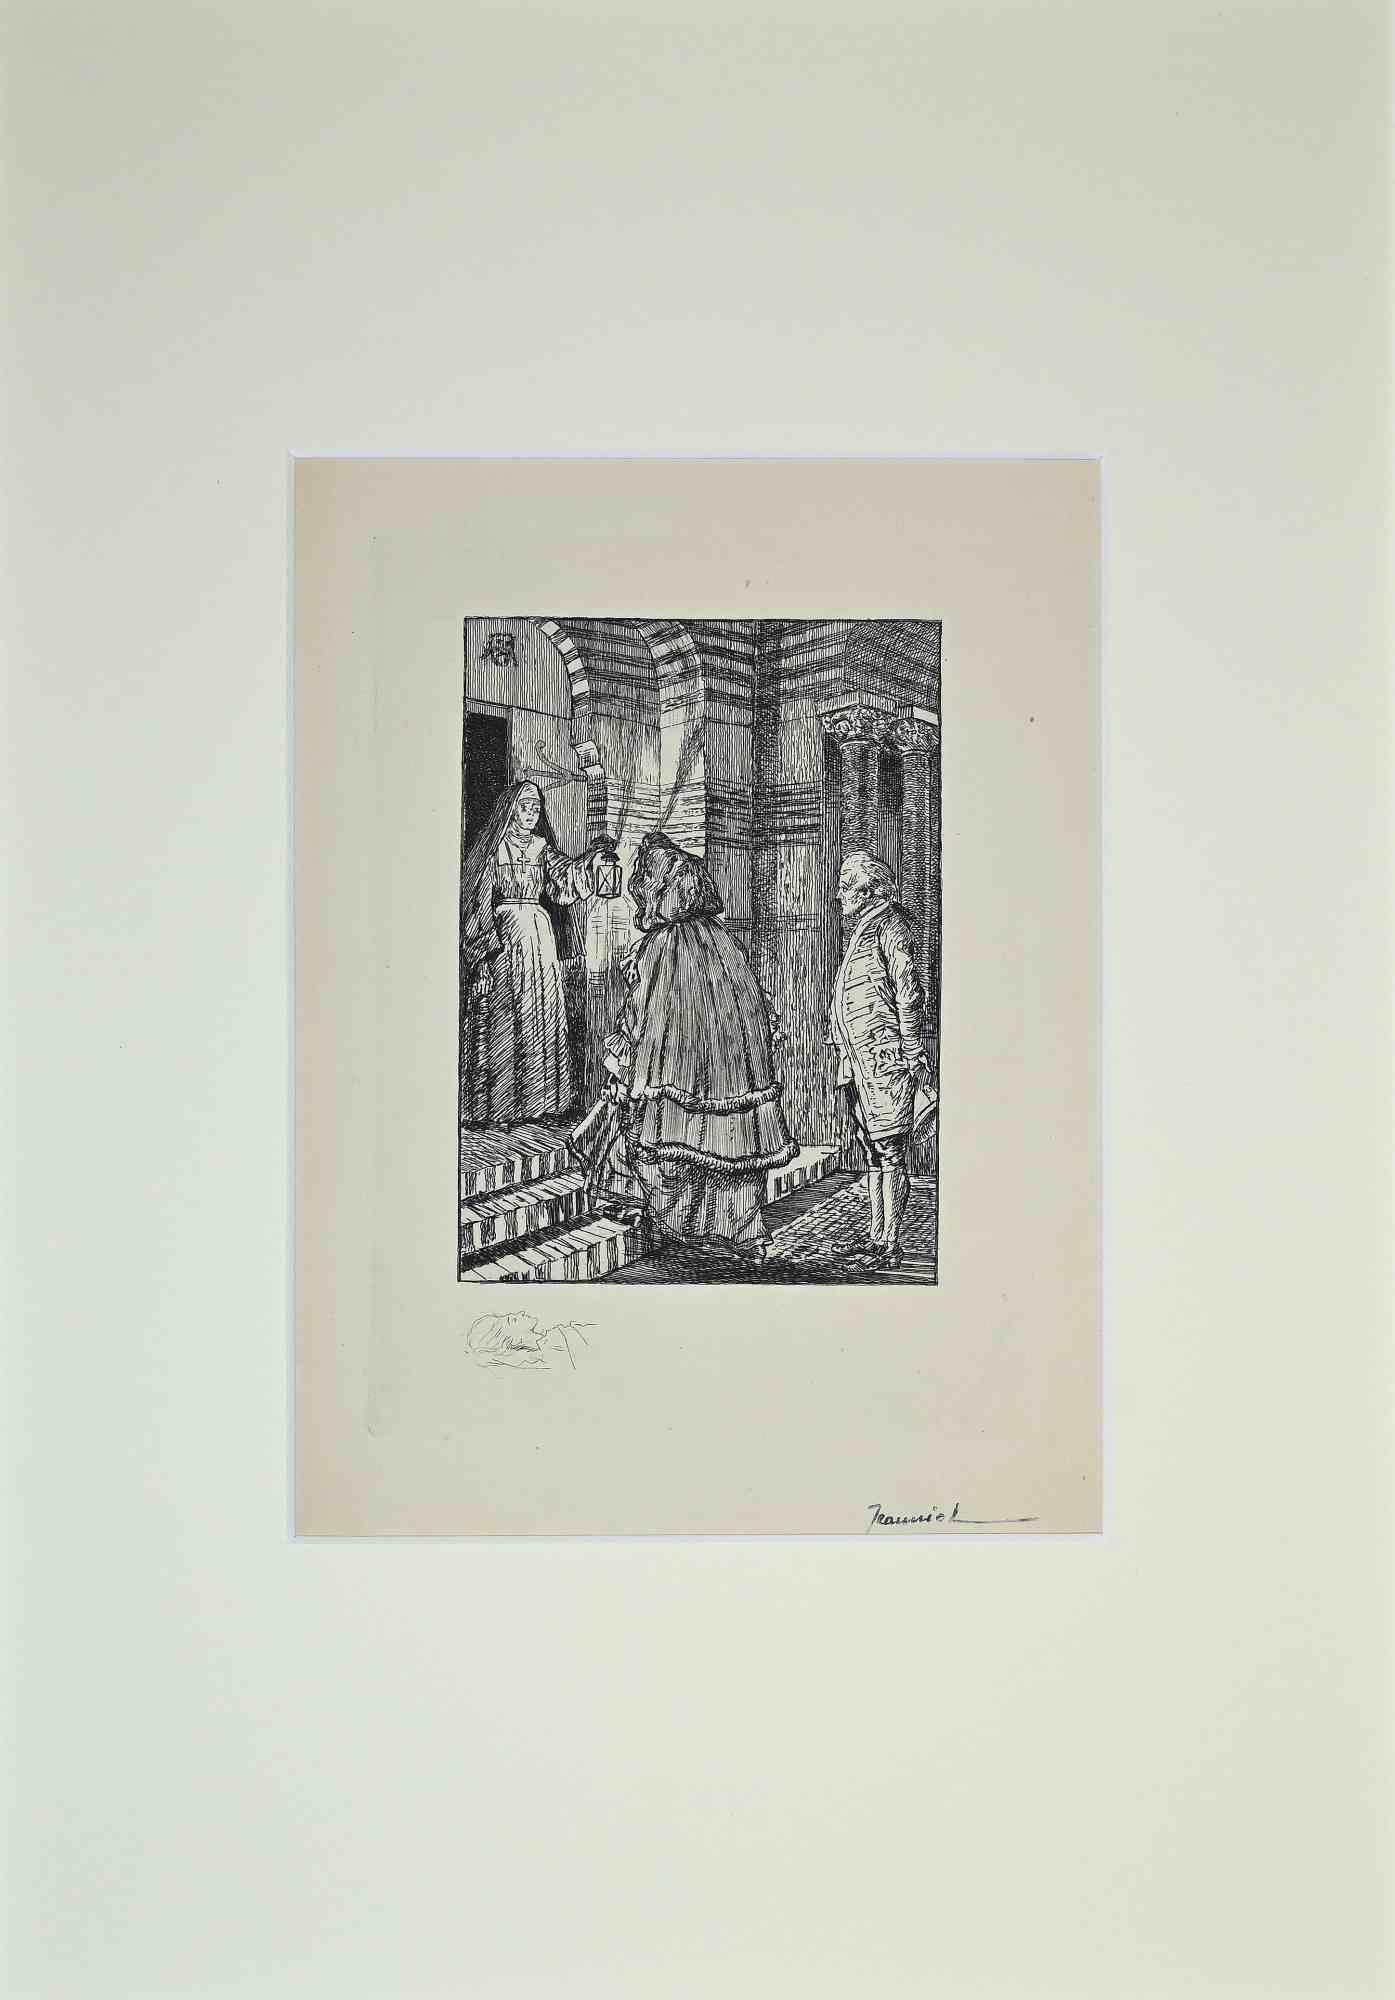 Pierre Georges Jeanniot Figurative Print - The Life of Casanova 2  - Etching by G. Jeanniot - Early 20th Century